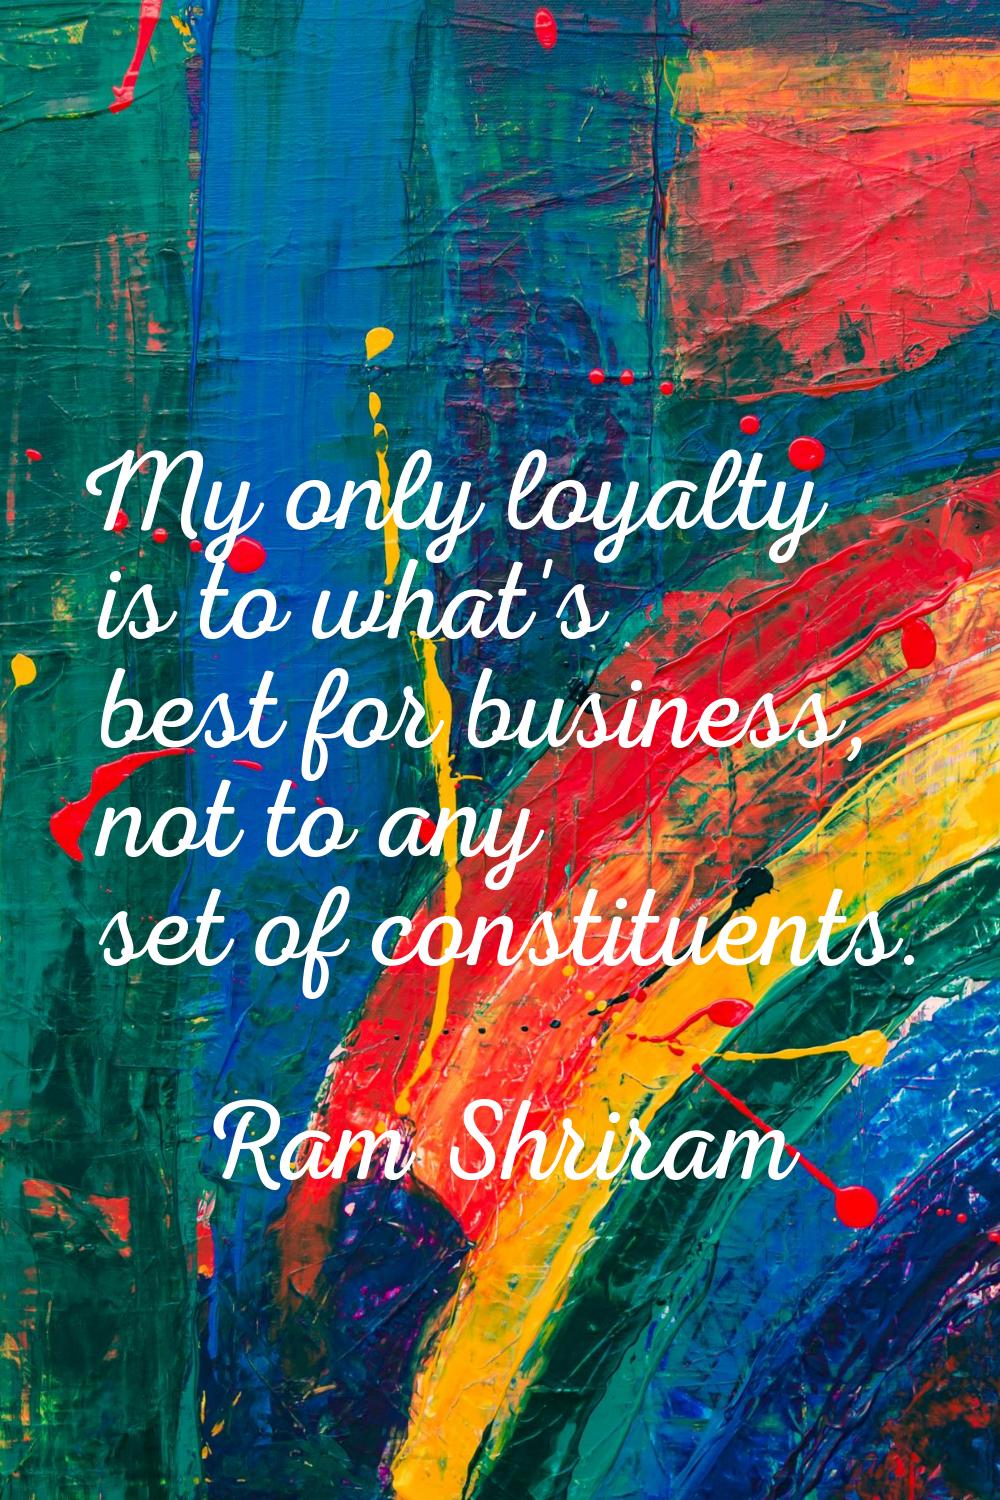 My only loyalty is to what's best for business, not to any set of constituents.